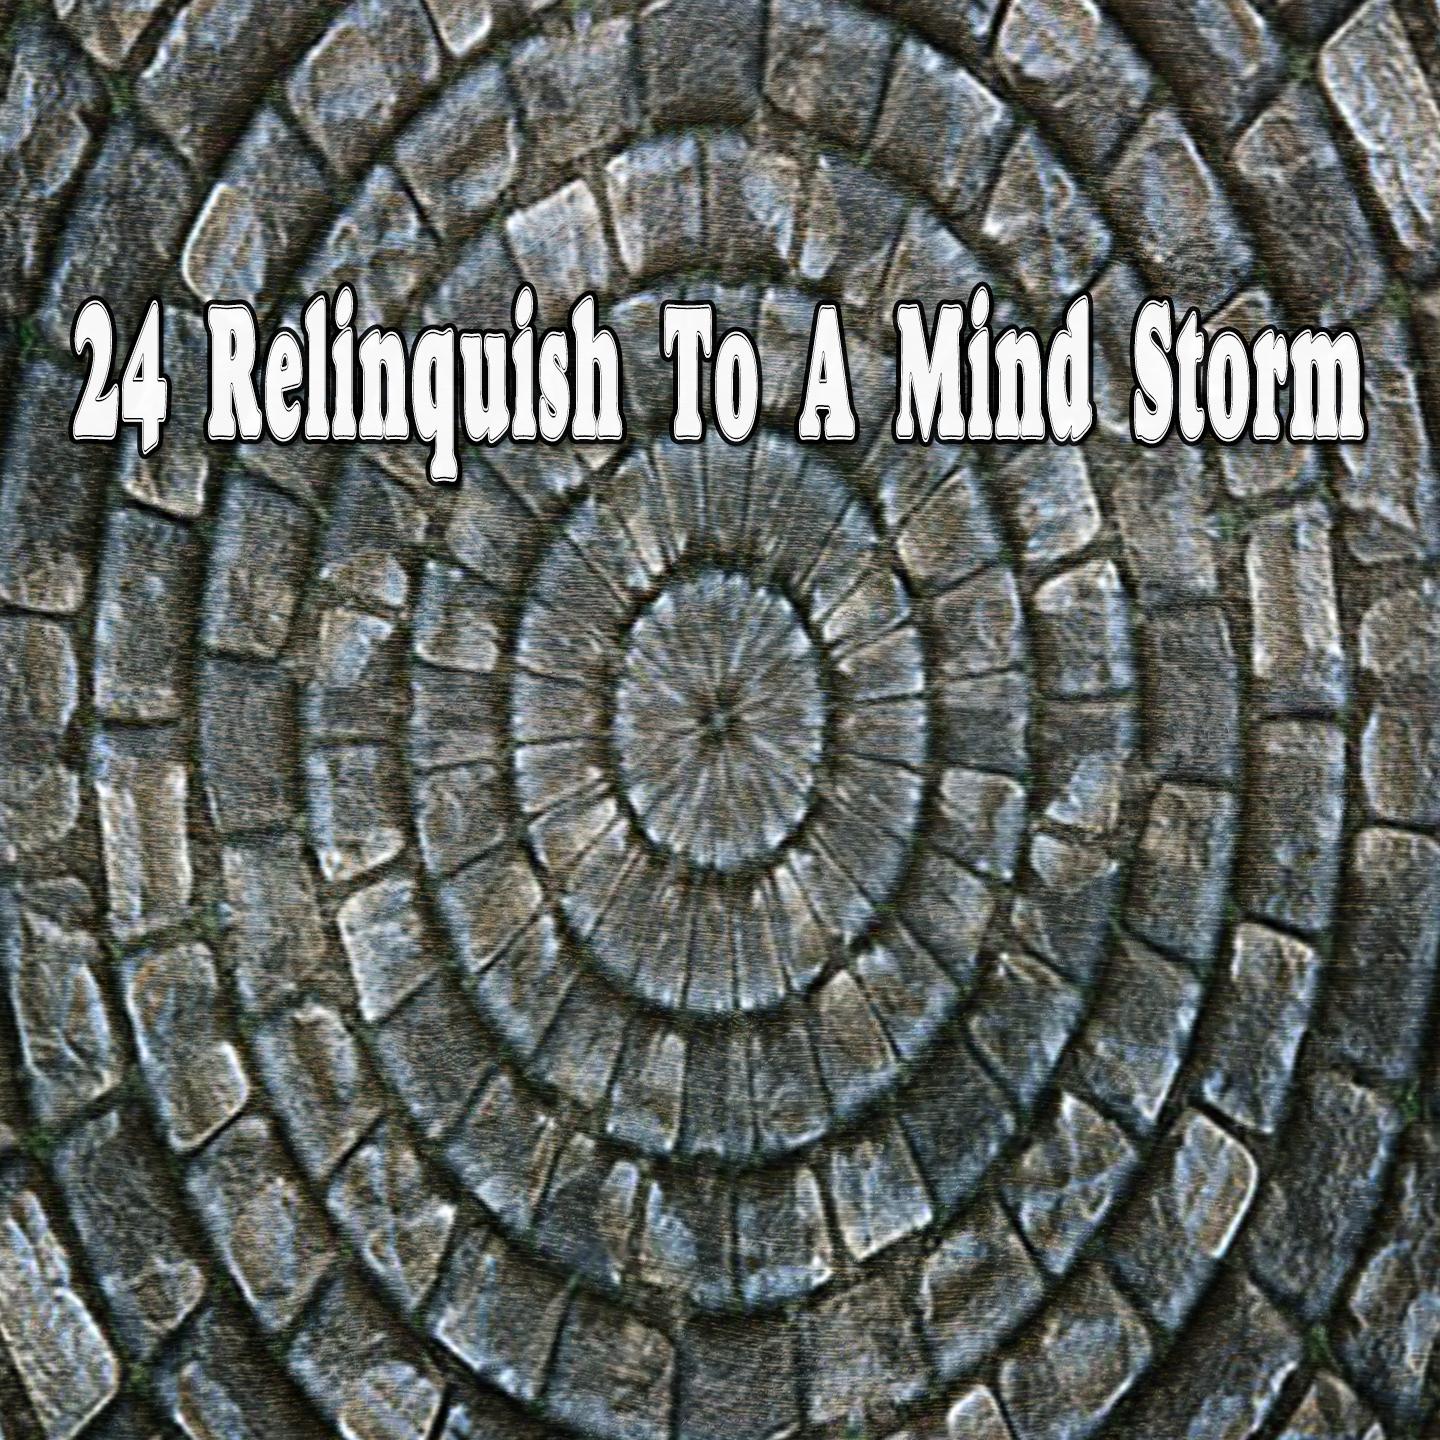 24 Relinquish to a Mind Storm